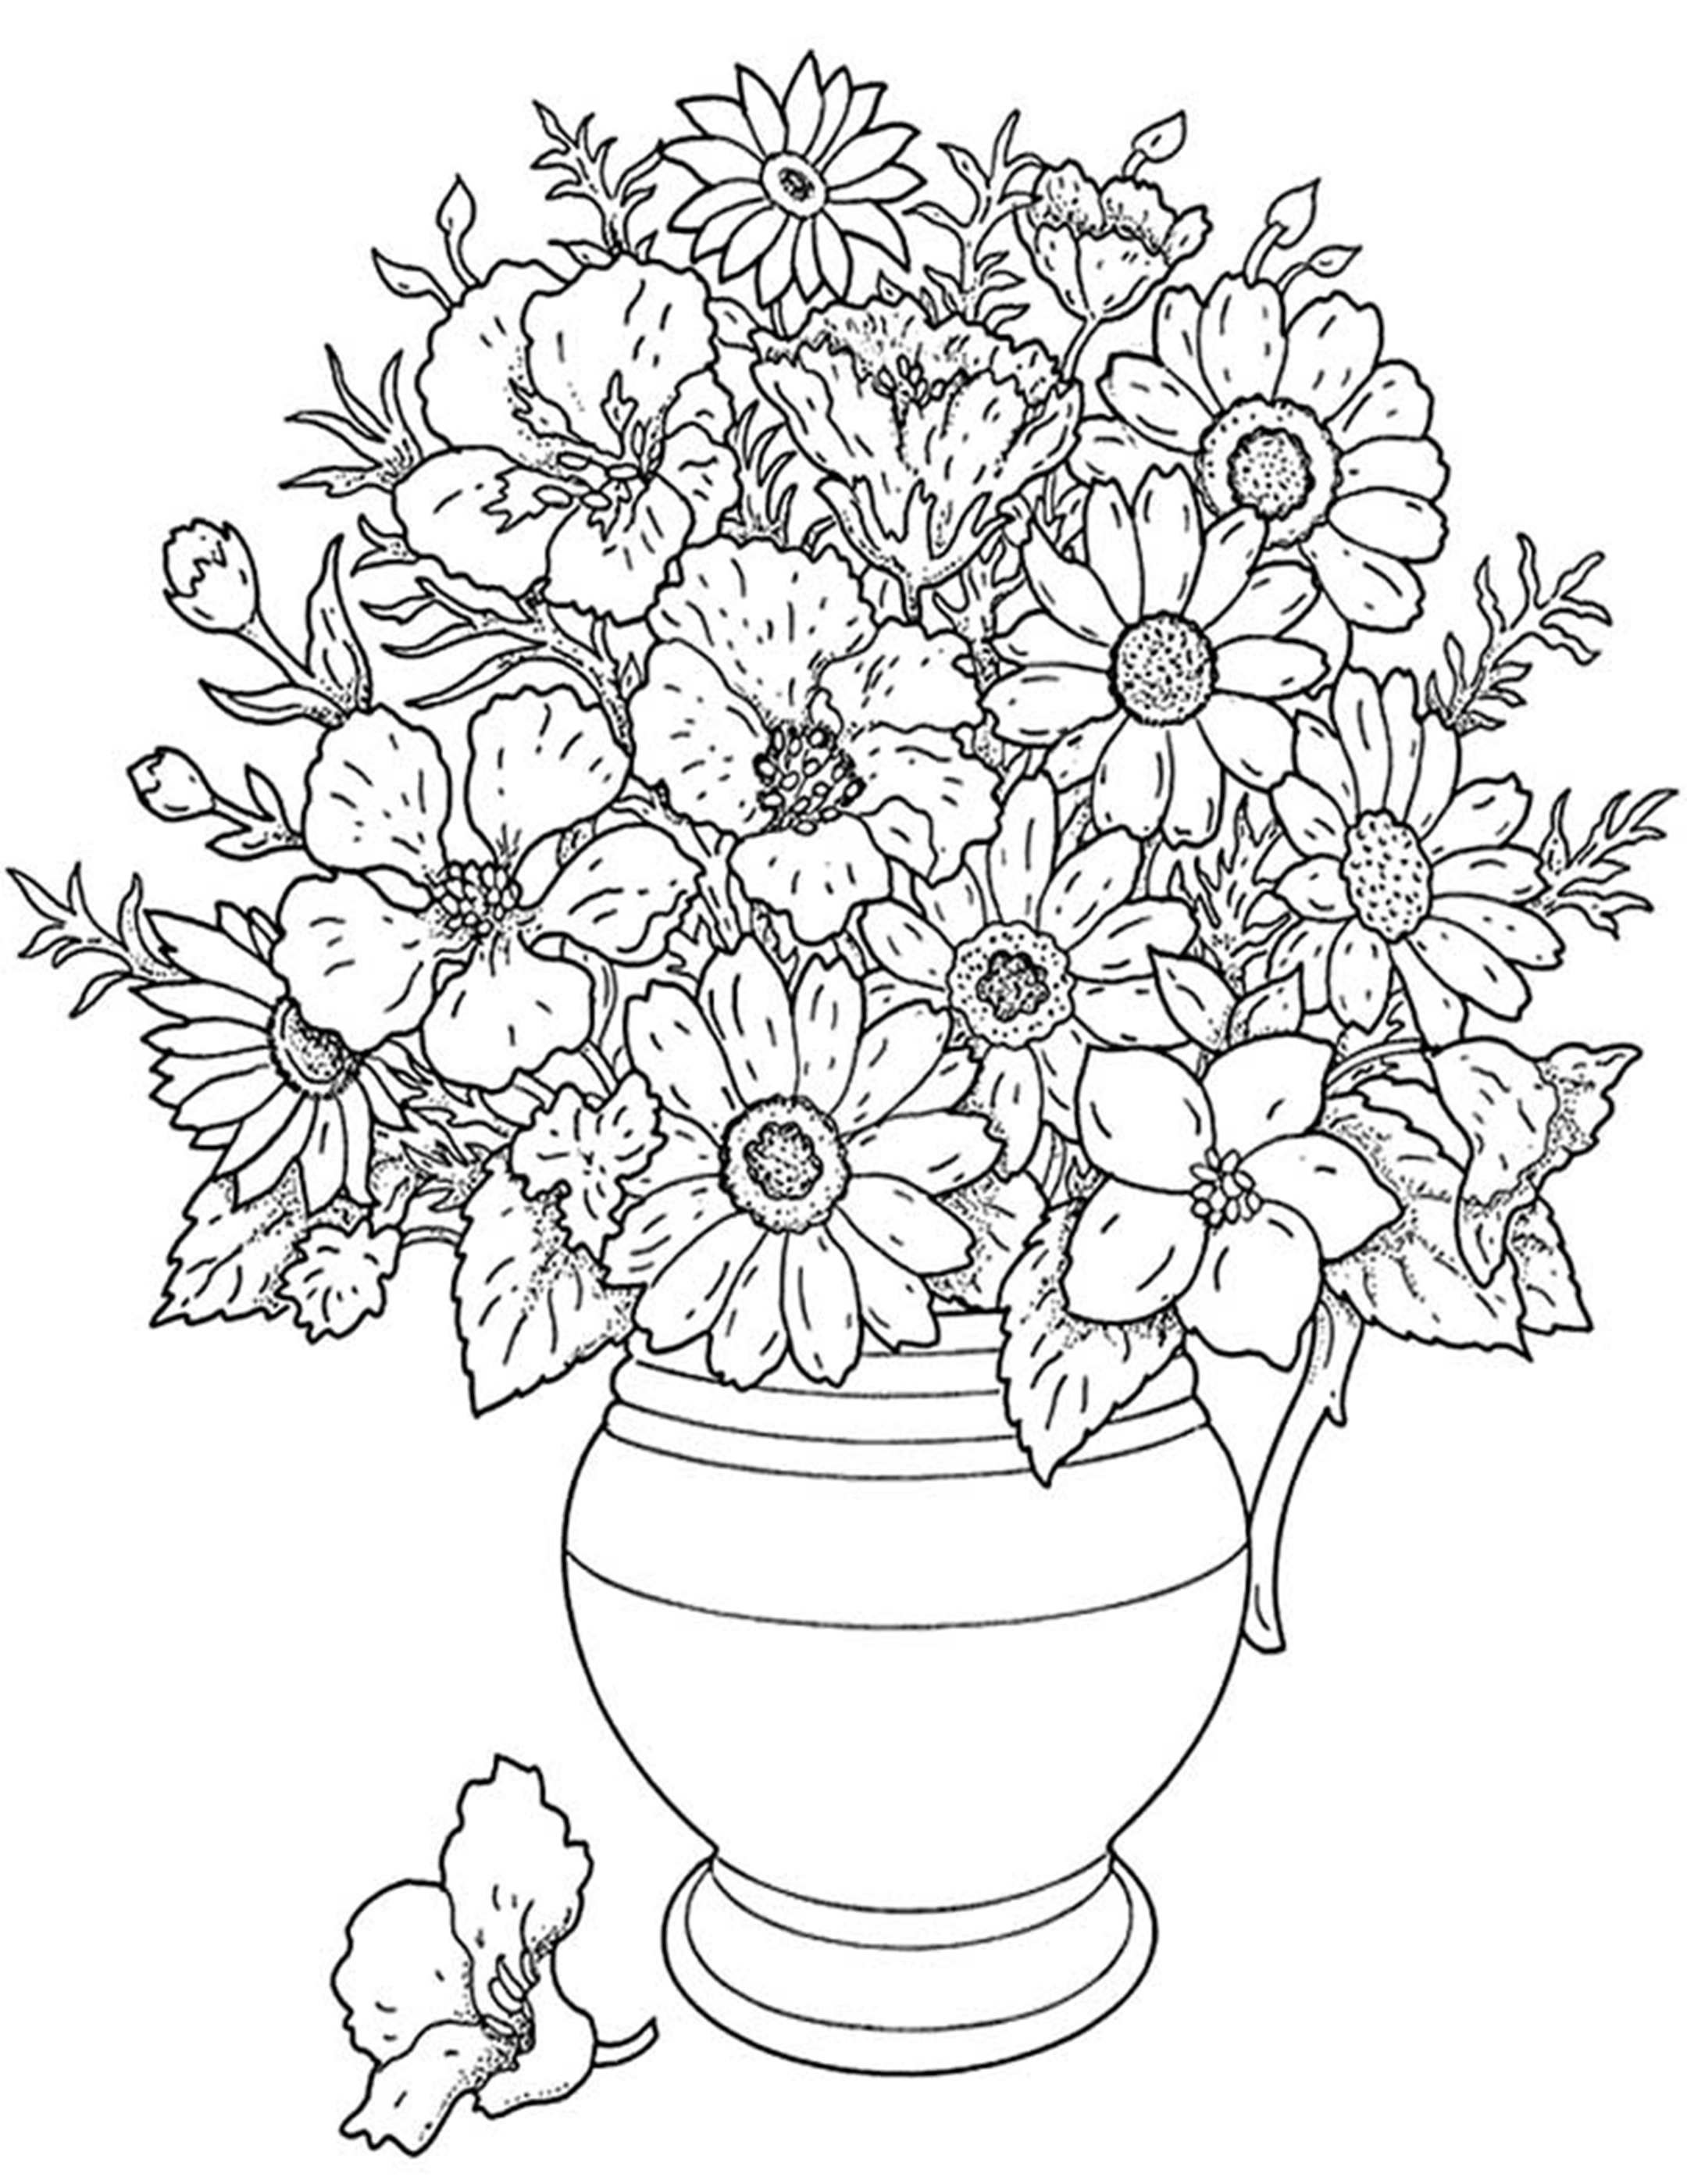 colouring flowers free printable flower coloring pages for kids cool2bkids colouring flowers 